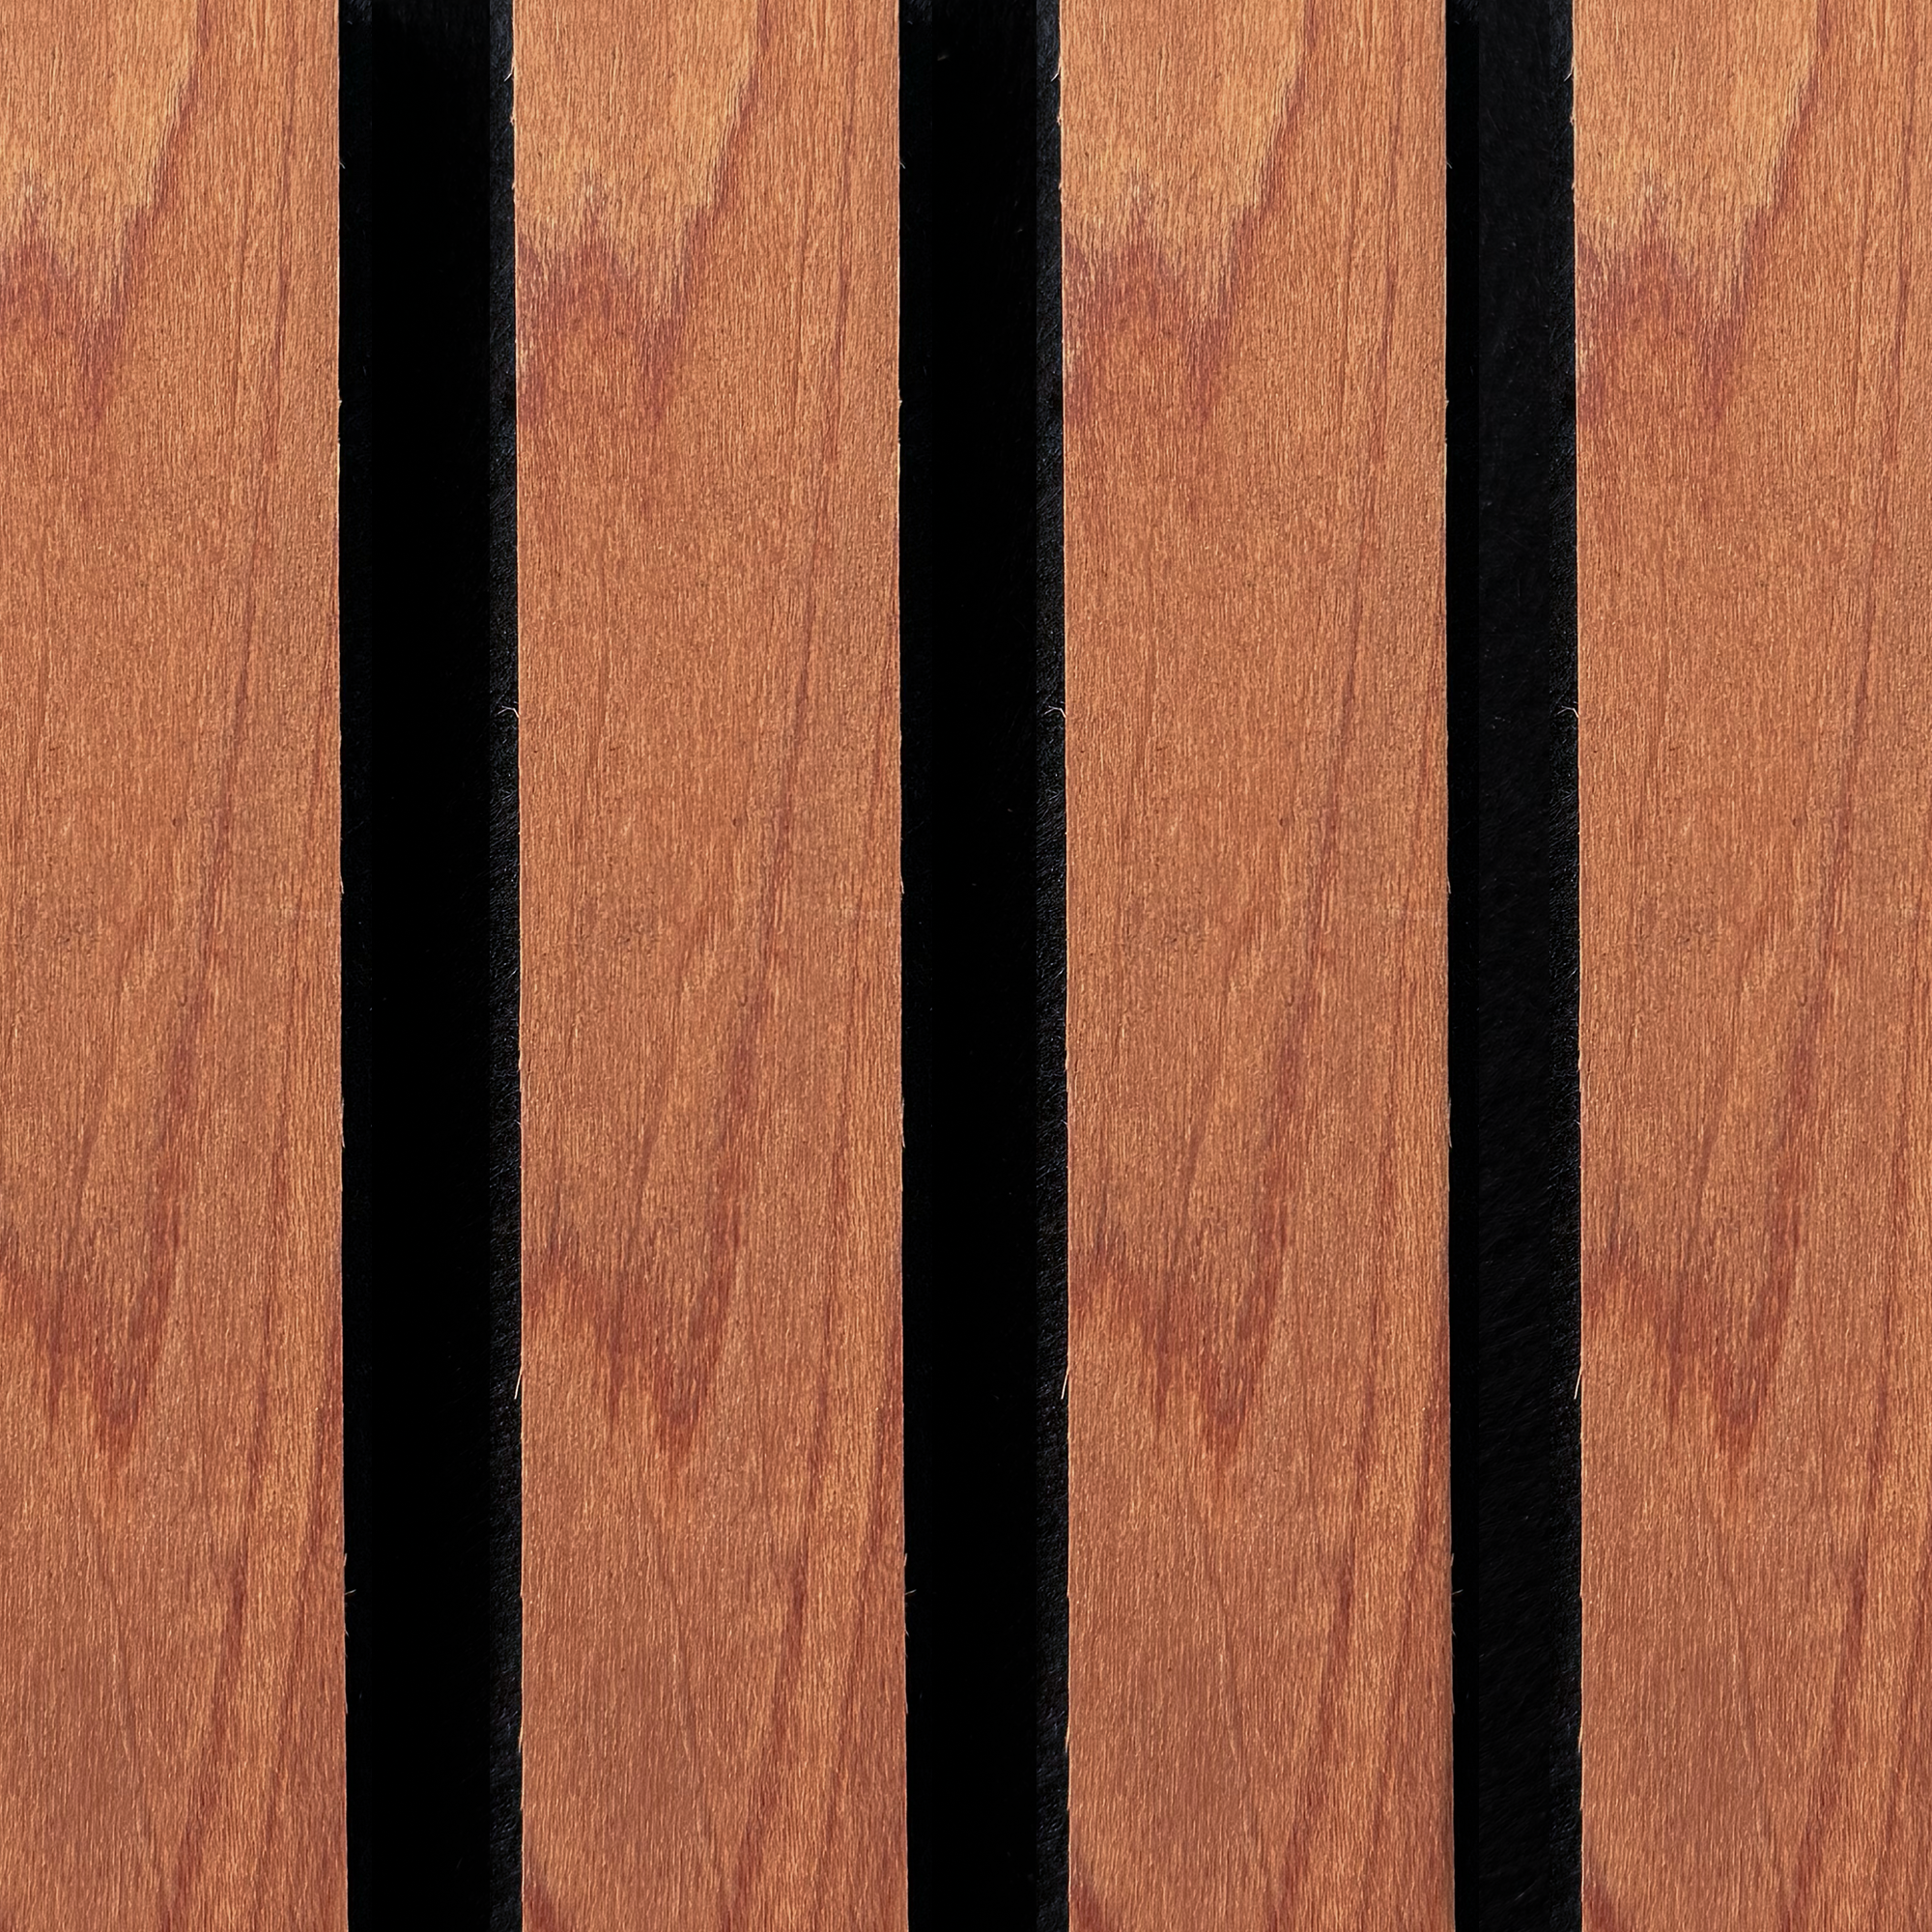 Smooth wood veneer finish with fire-rated acoustic backing. Fast and simple installation for domestic or commercial use.